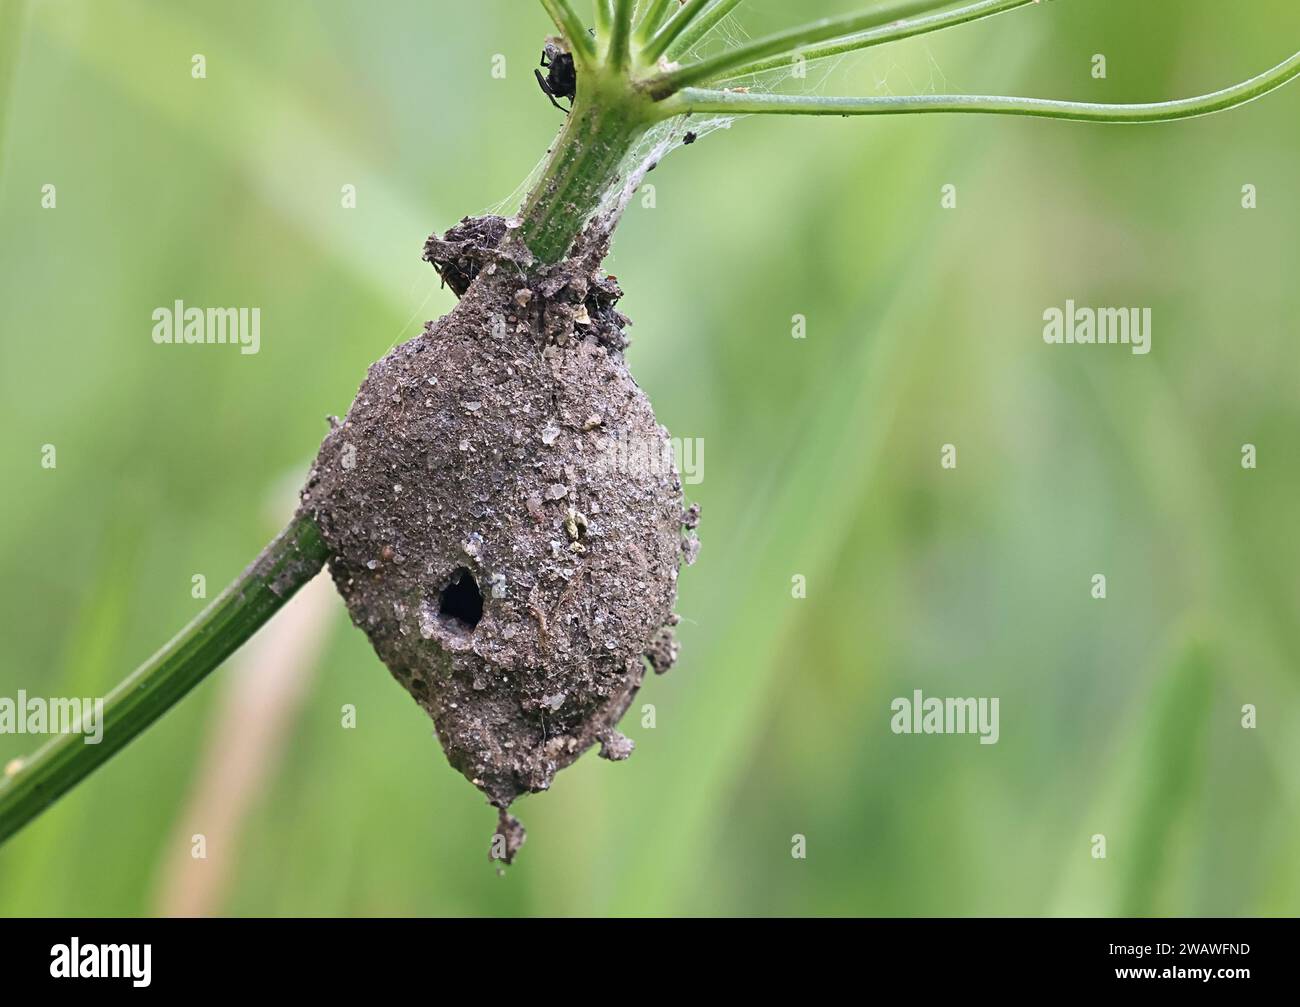 Egg sac or cocoon of Agroeca brunnea, a liocranid spider from Finland Stock Photo